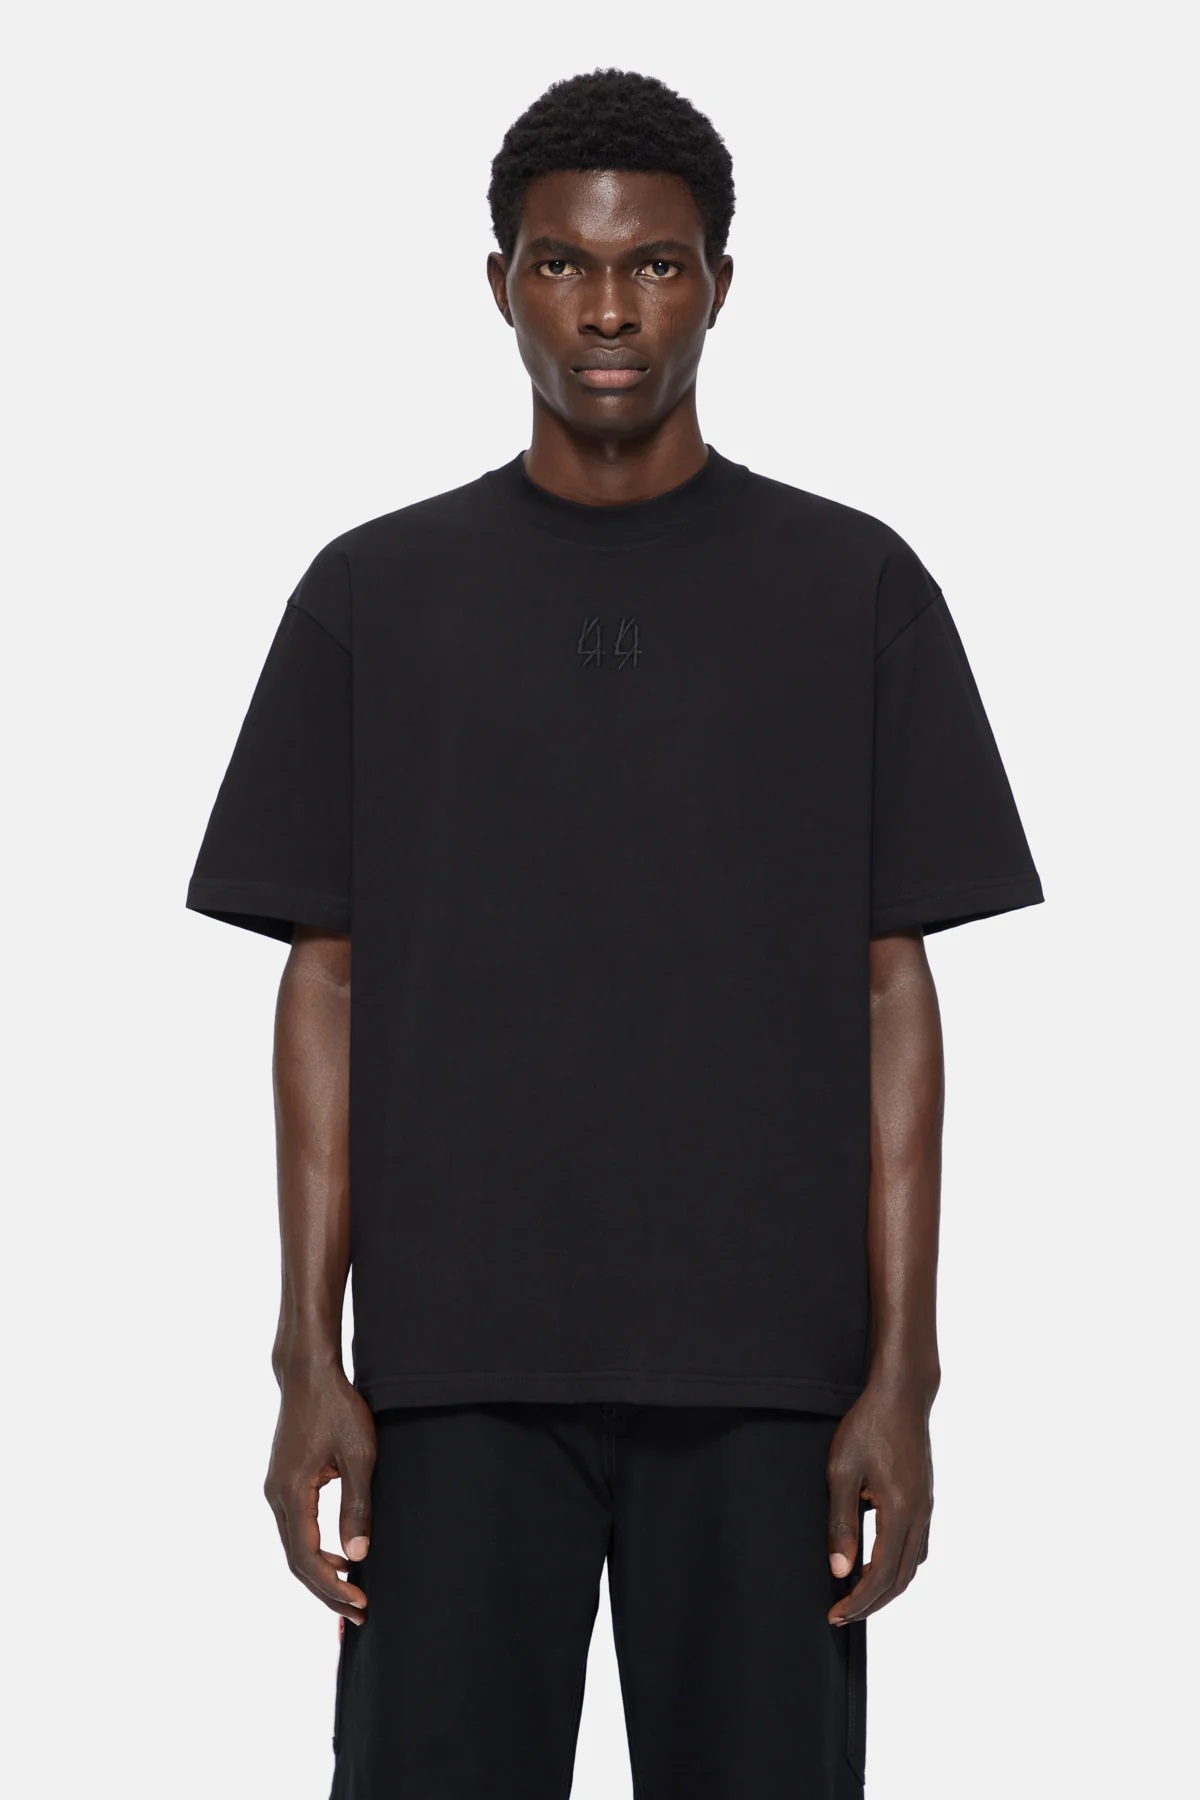 44 LABEL GROUP Arabic Dial Tee in Black S